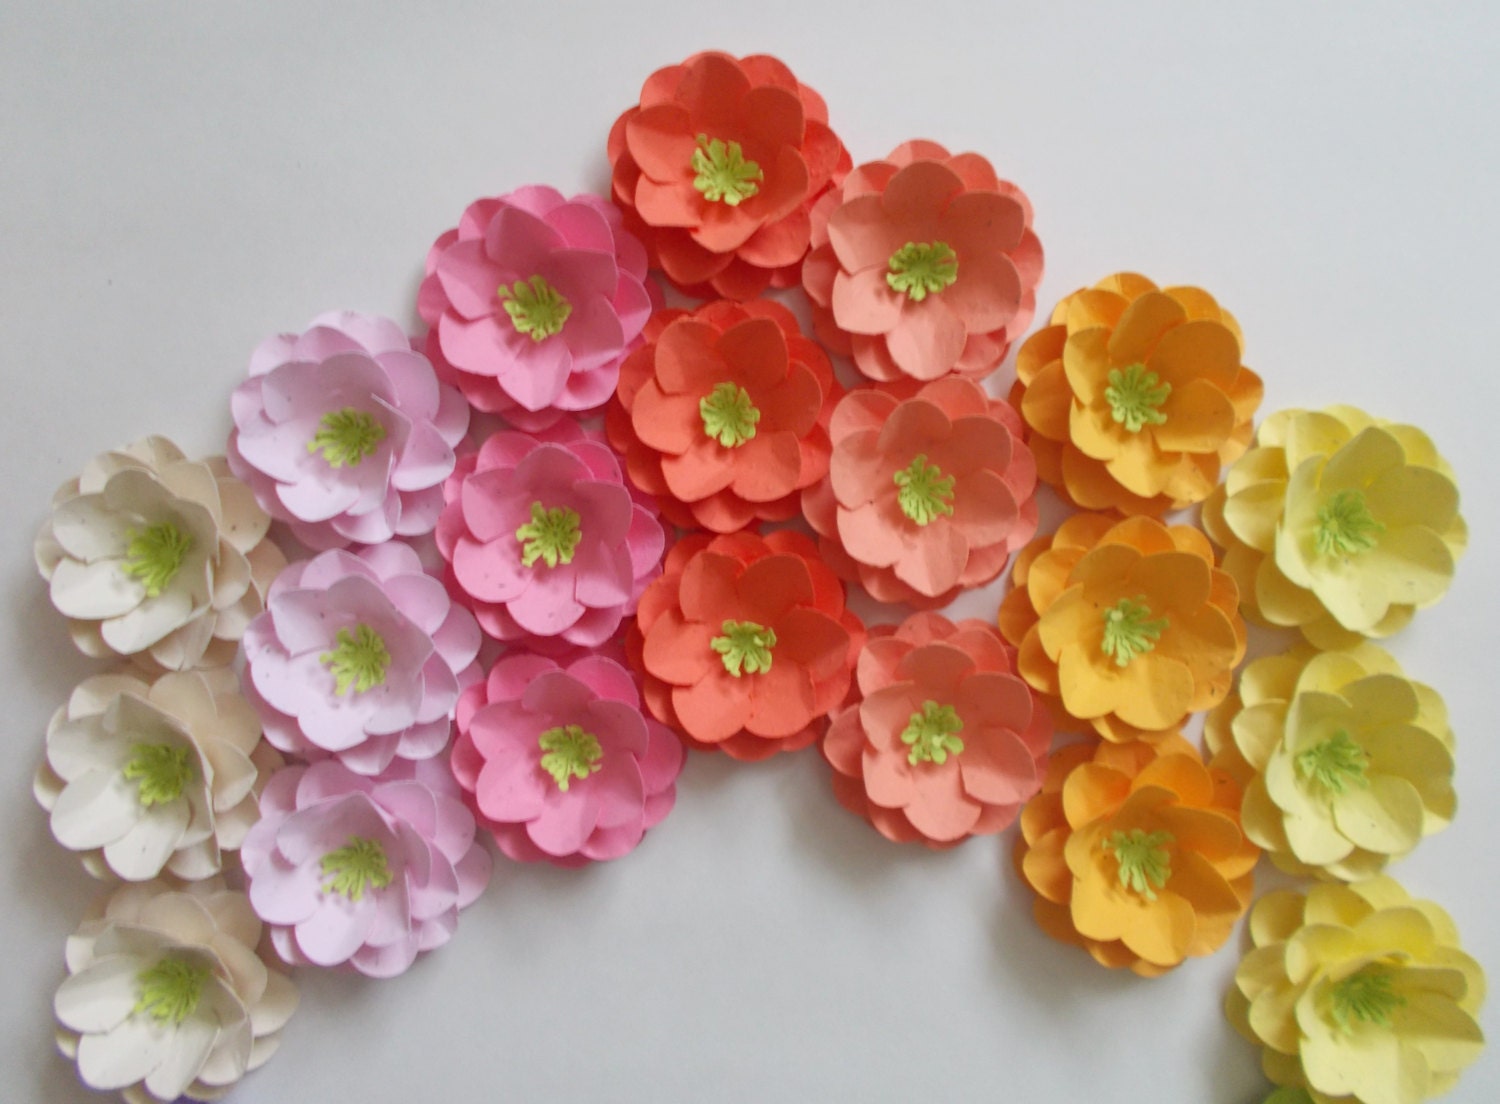 100 Paper Rose Wedding Favors - Plantable Seed Paper Flowers Embedded with Seeds - Pink, Orange and Yellow Roses